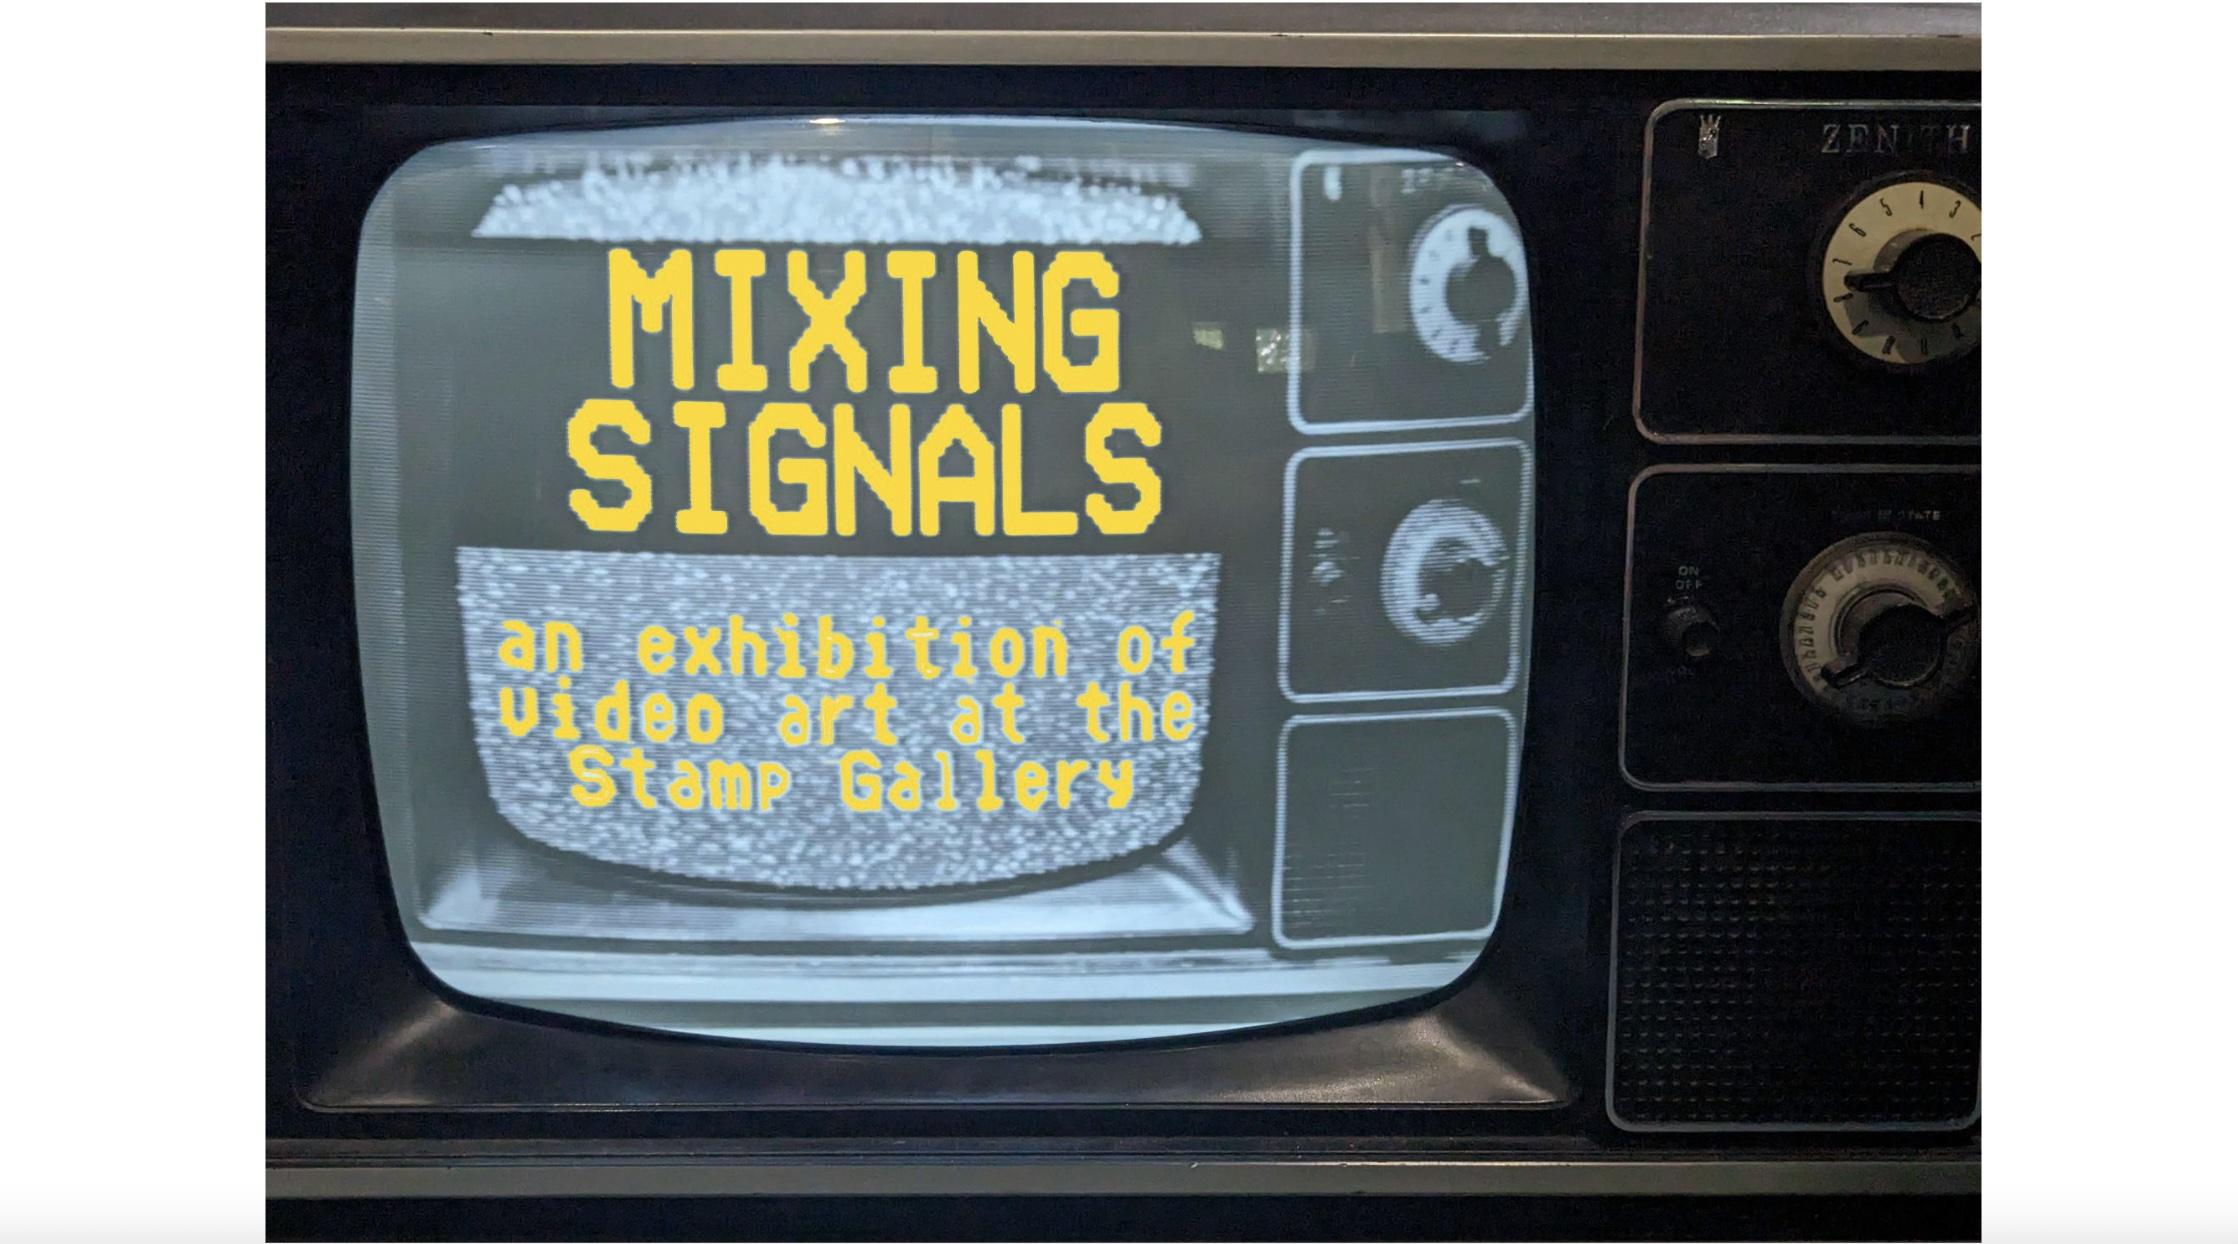 Image of old-fashioned TV bearing the words "Mixing Signals: an exhibition of video art at the Stamp Gallery" displayed from another TV 